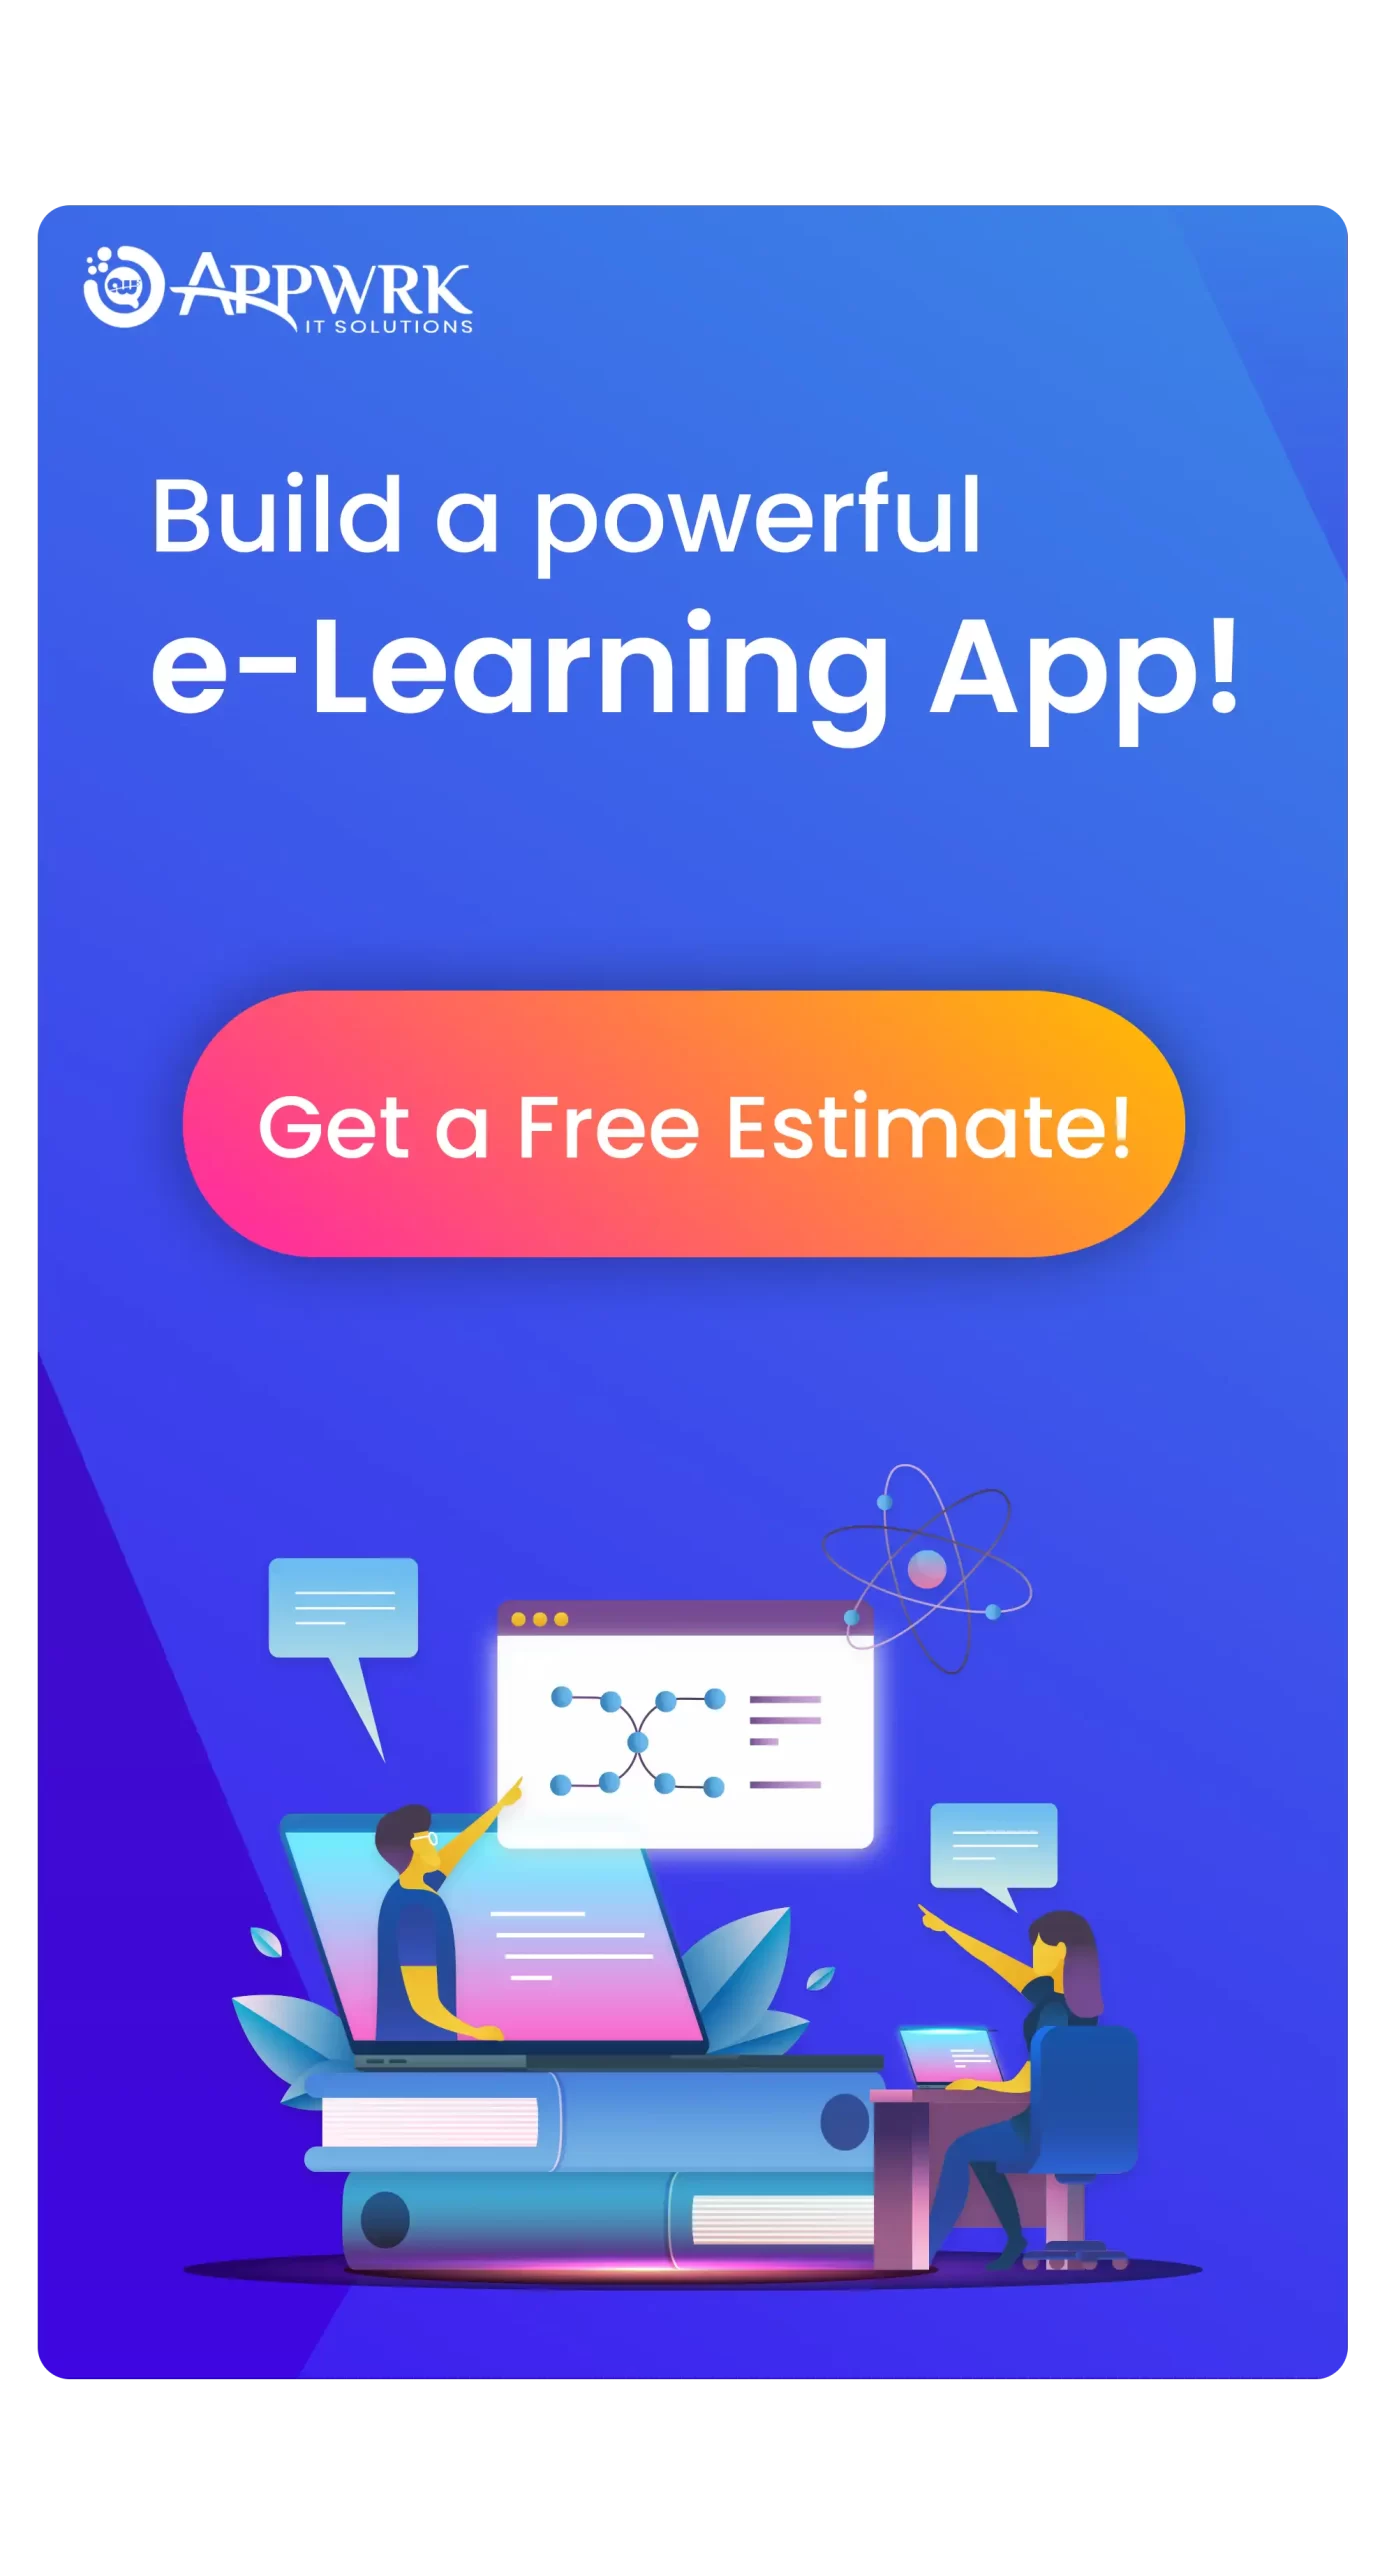 Build-a-powerful-e-learning-app-appwrk